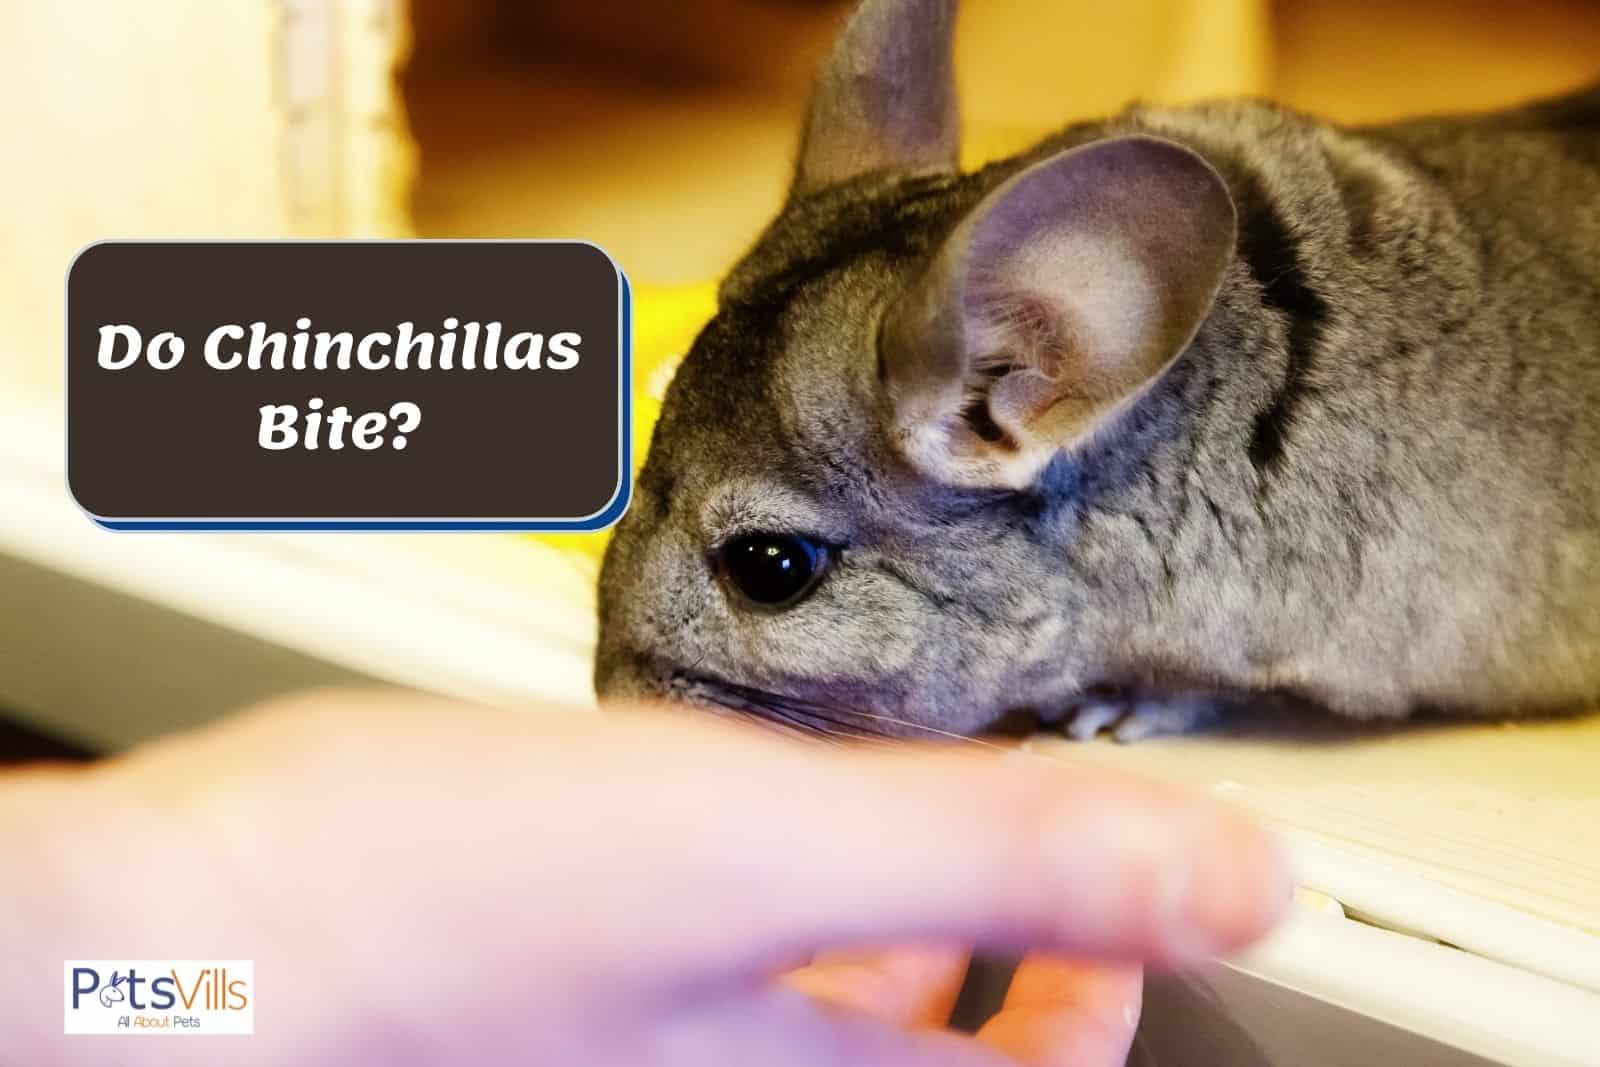 a chinchilla is biting on hand